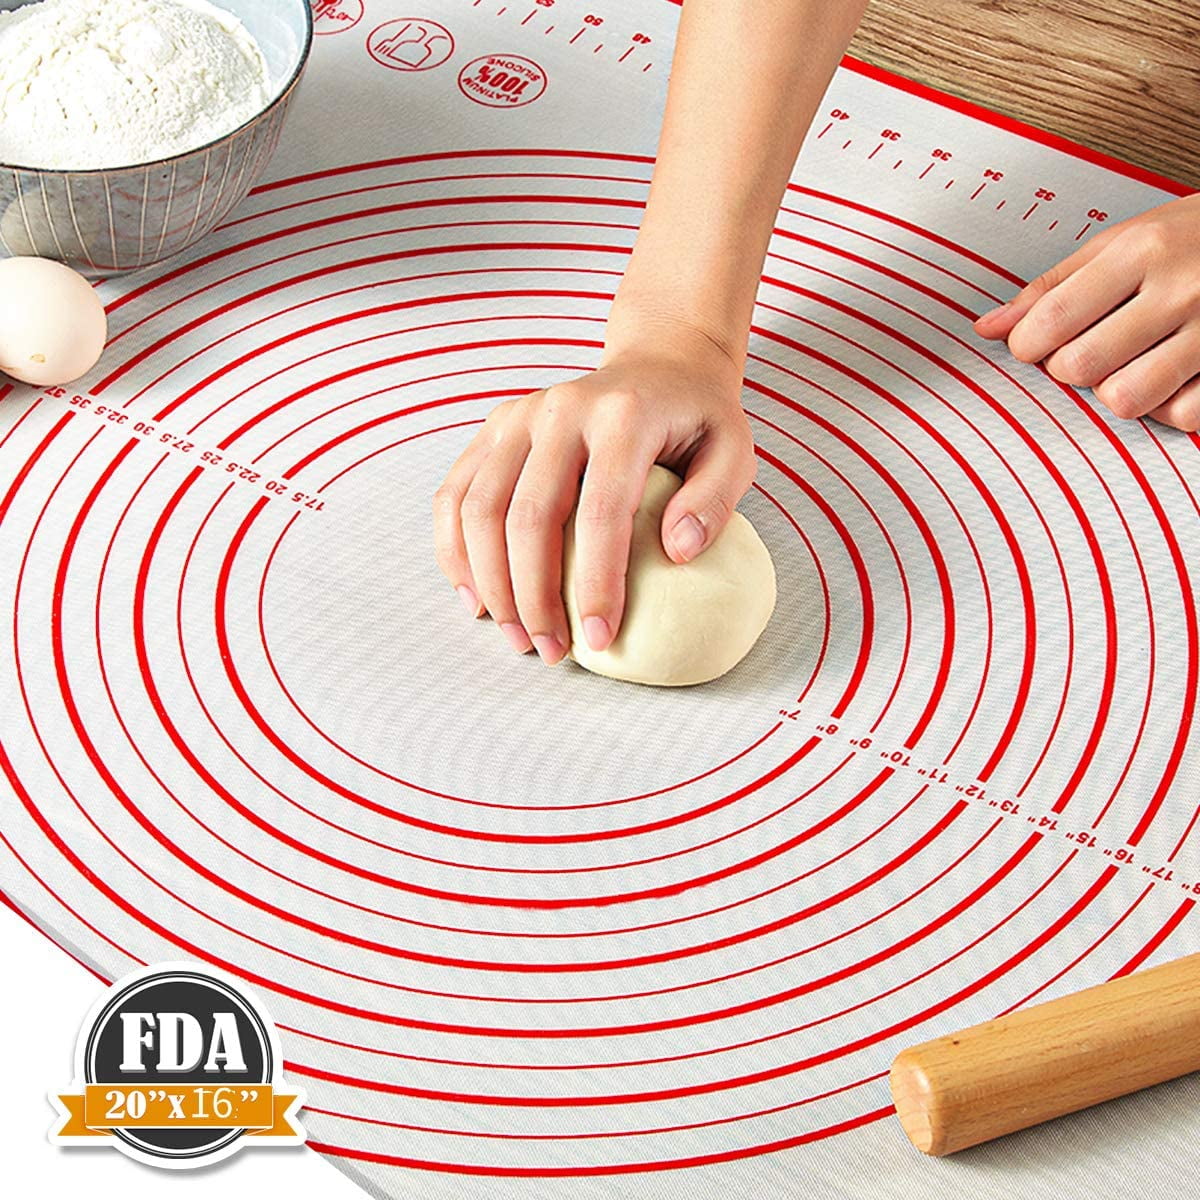 Silicone Non-stick Roll Pad Cake Dough Baking Mat Pastry Clay Fondant Hot 